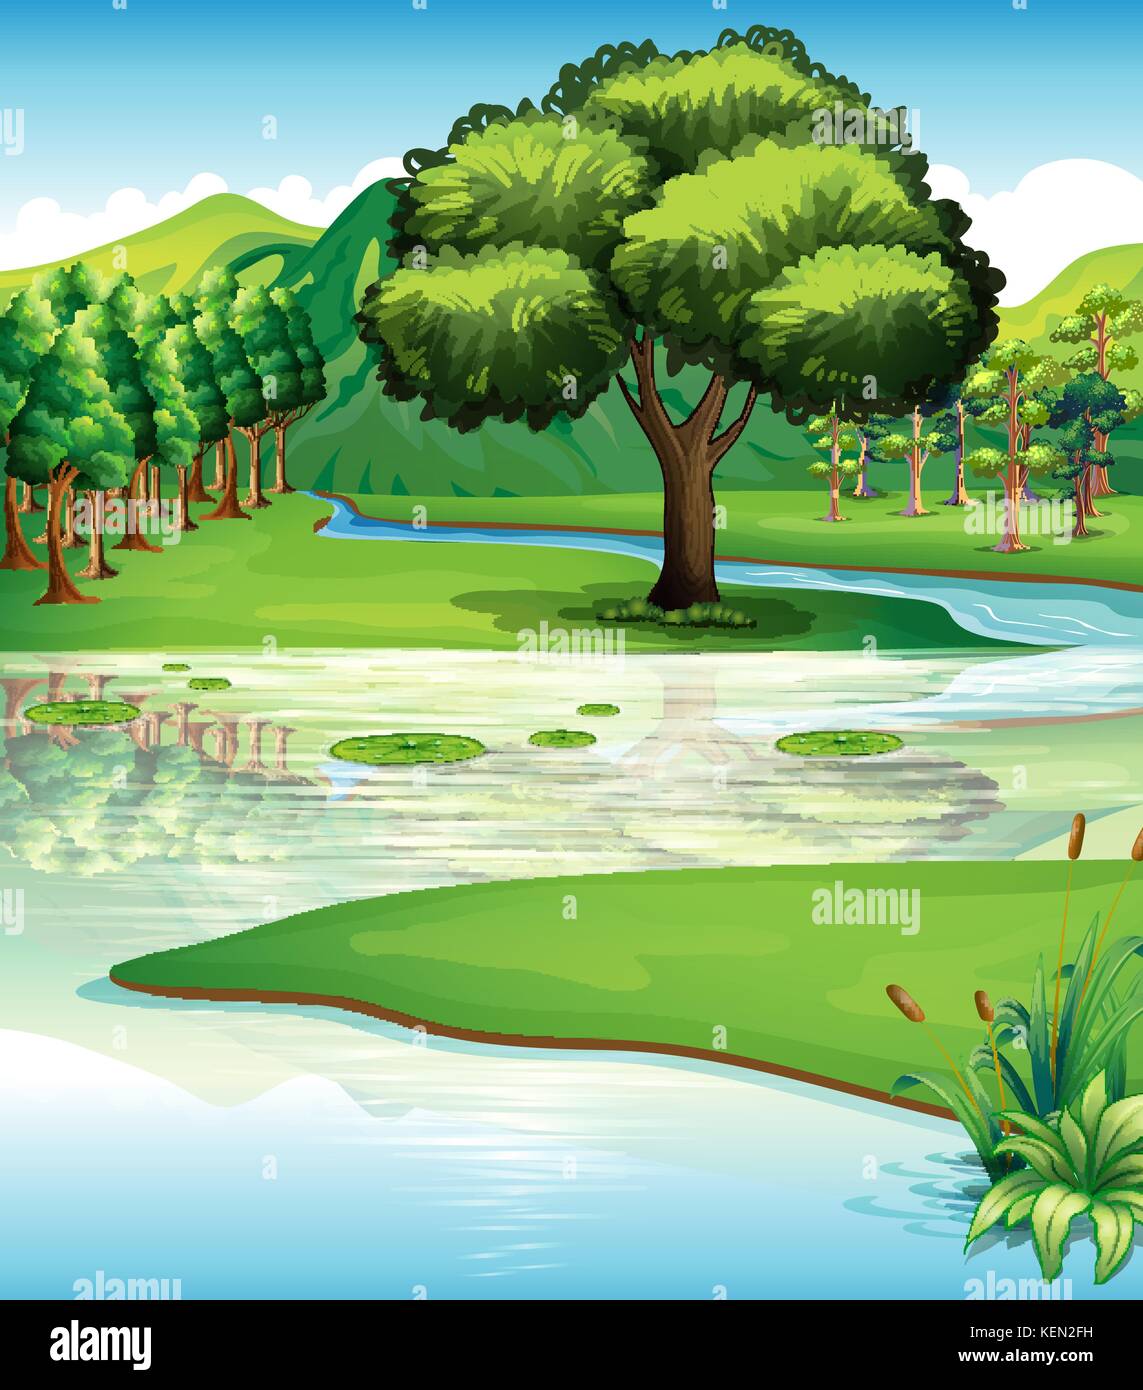 Illustration of the land and water resources Stock Vector